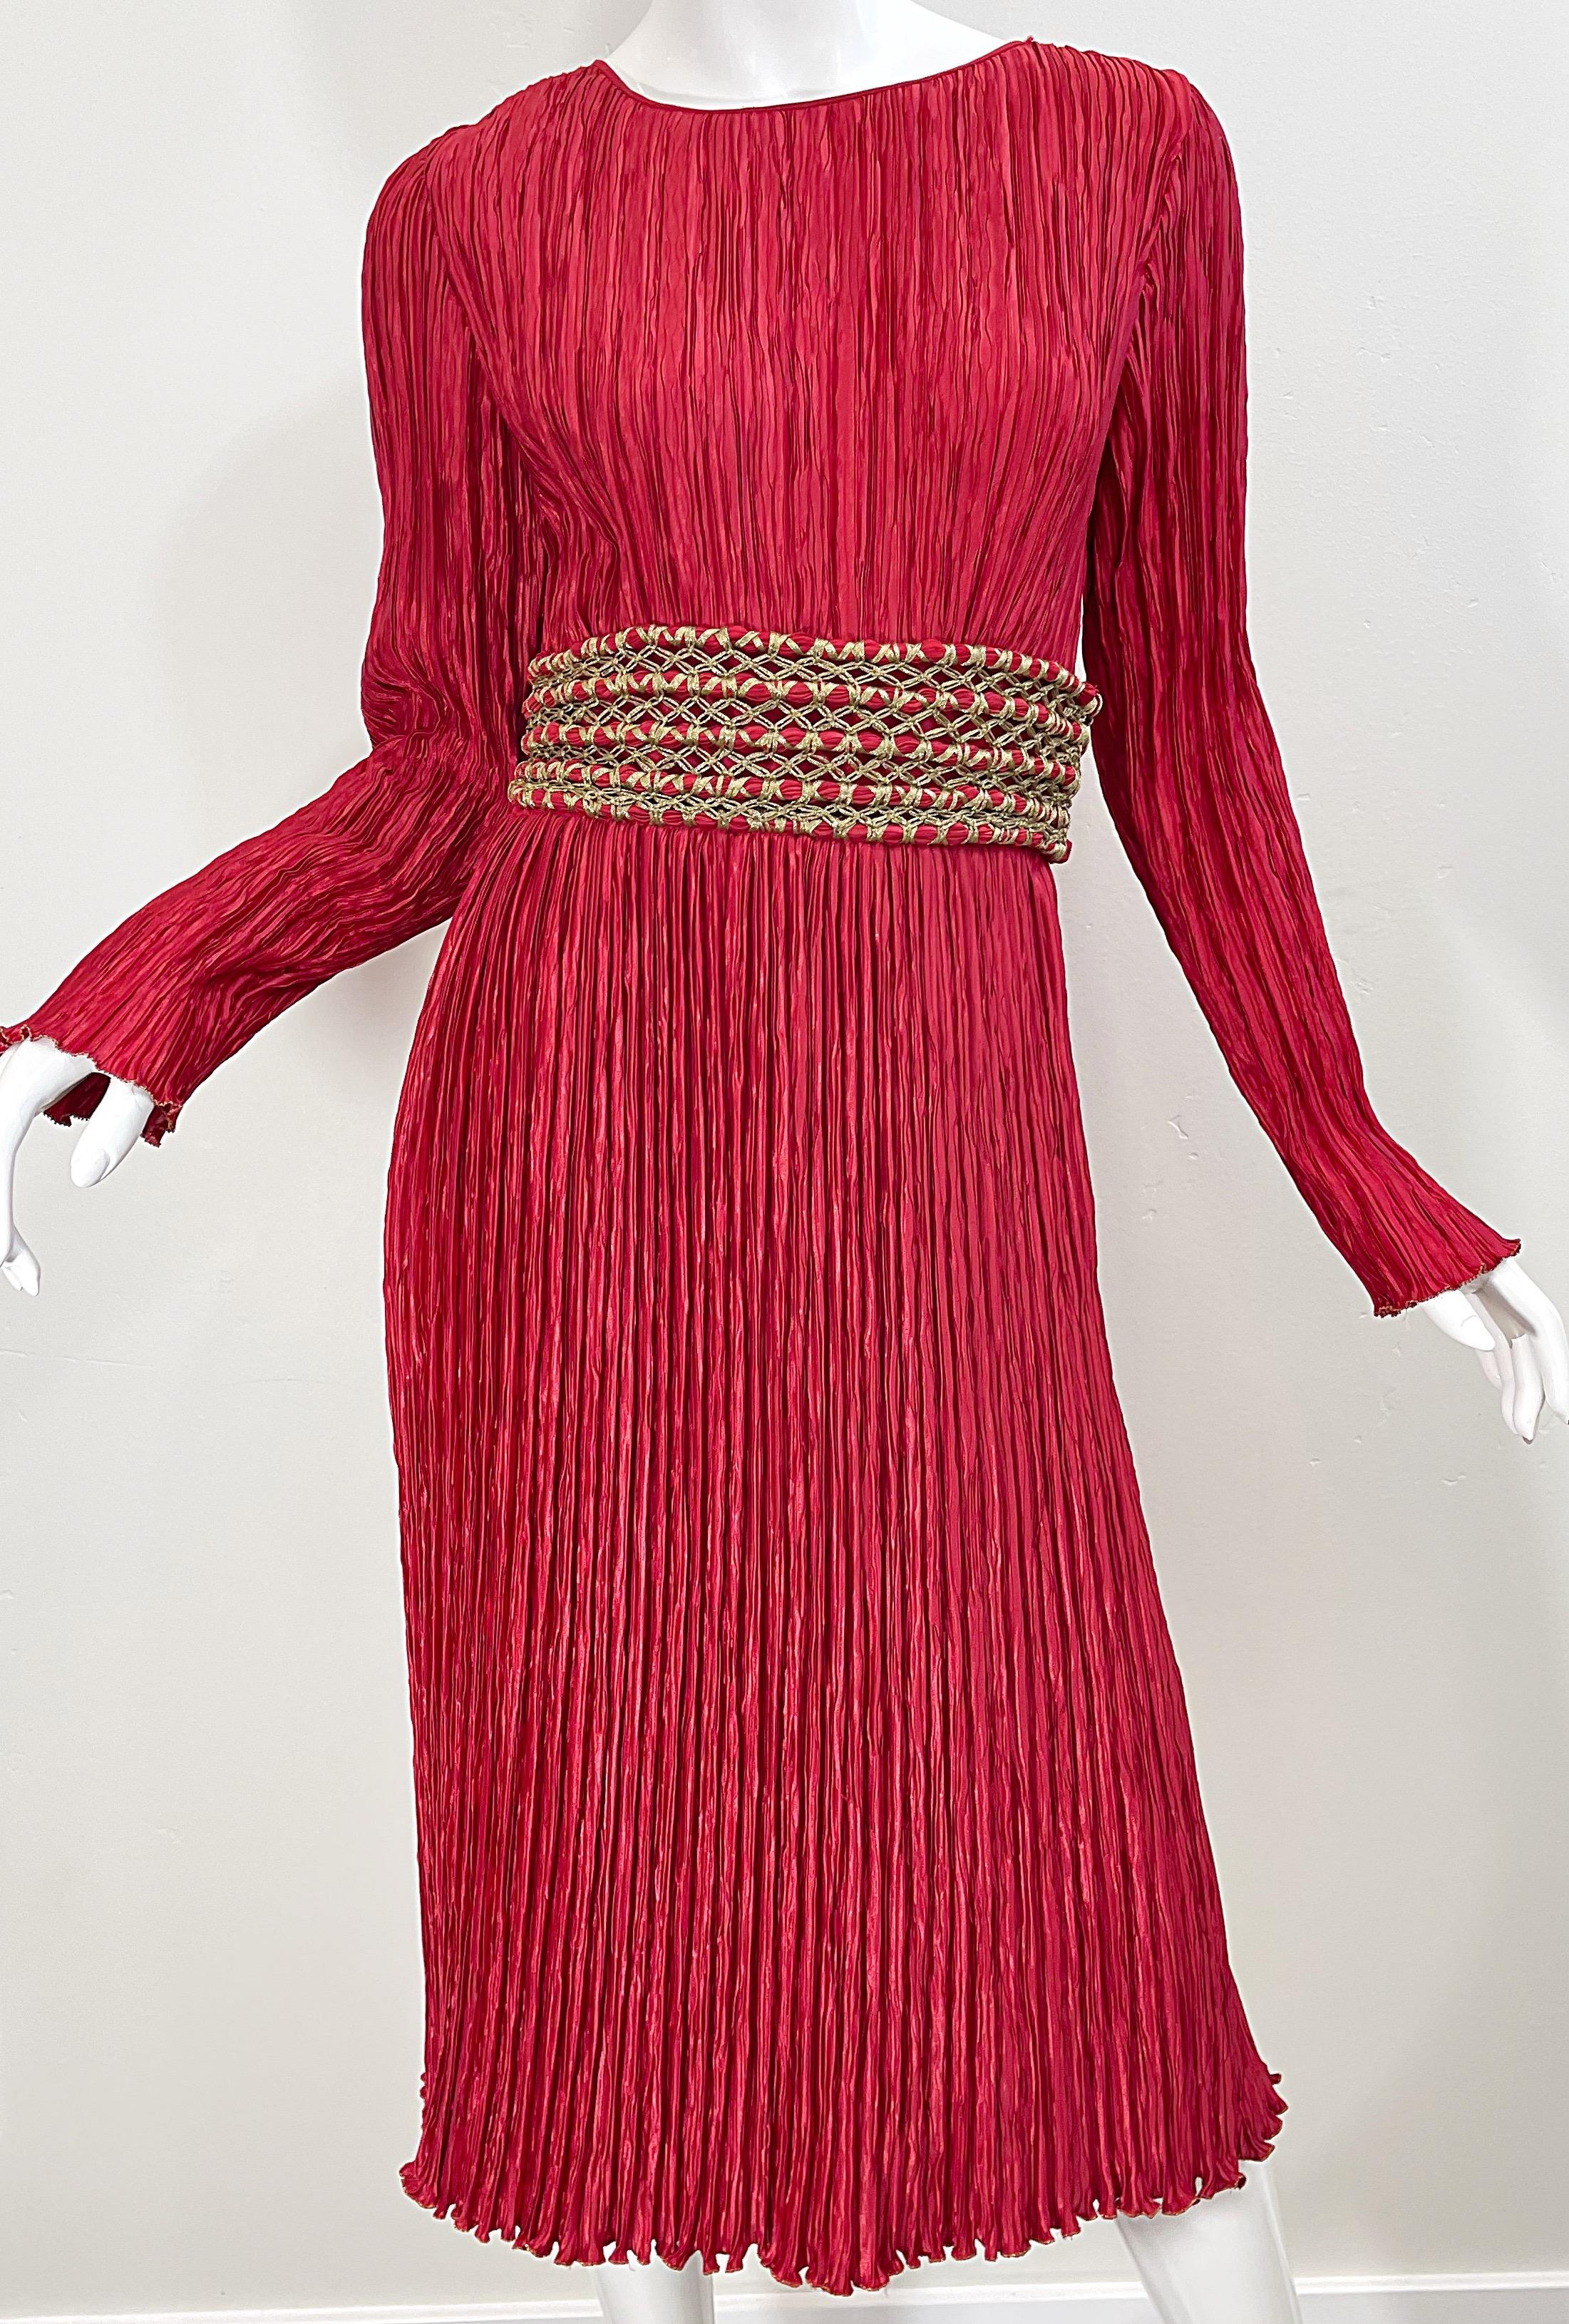 Women's Vintage Mary McFadden Couture 1980s Size 8 Crimson Red Fortuny Pleated 80s Dress